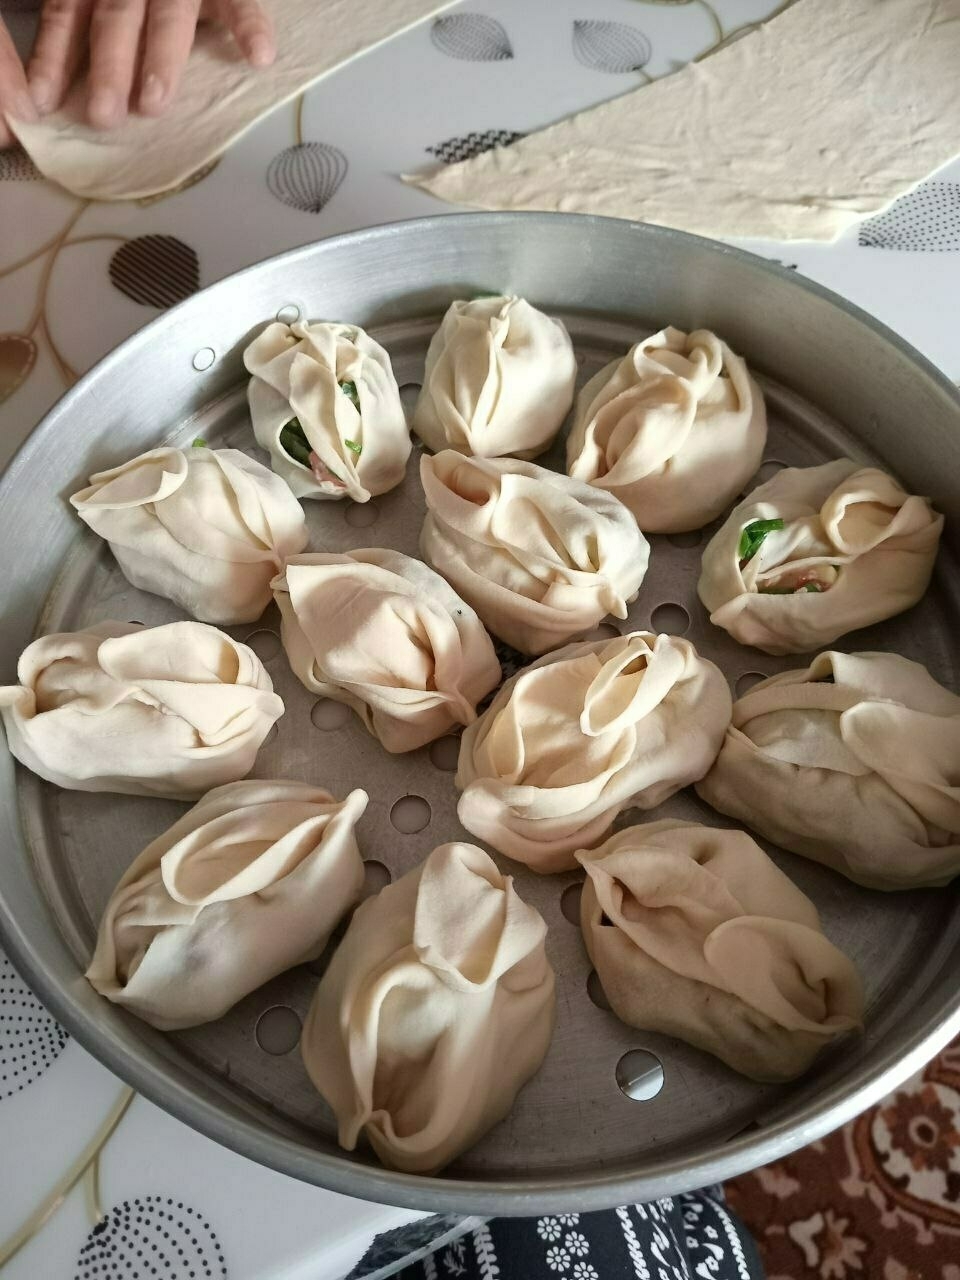 formed and filled manti (dumplings) in a metal steamer layer